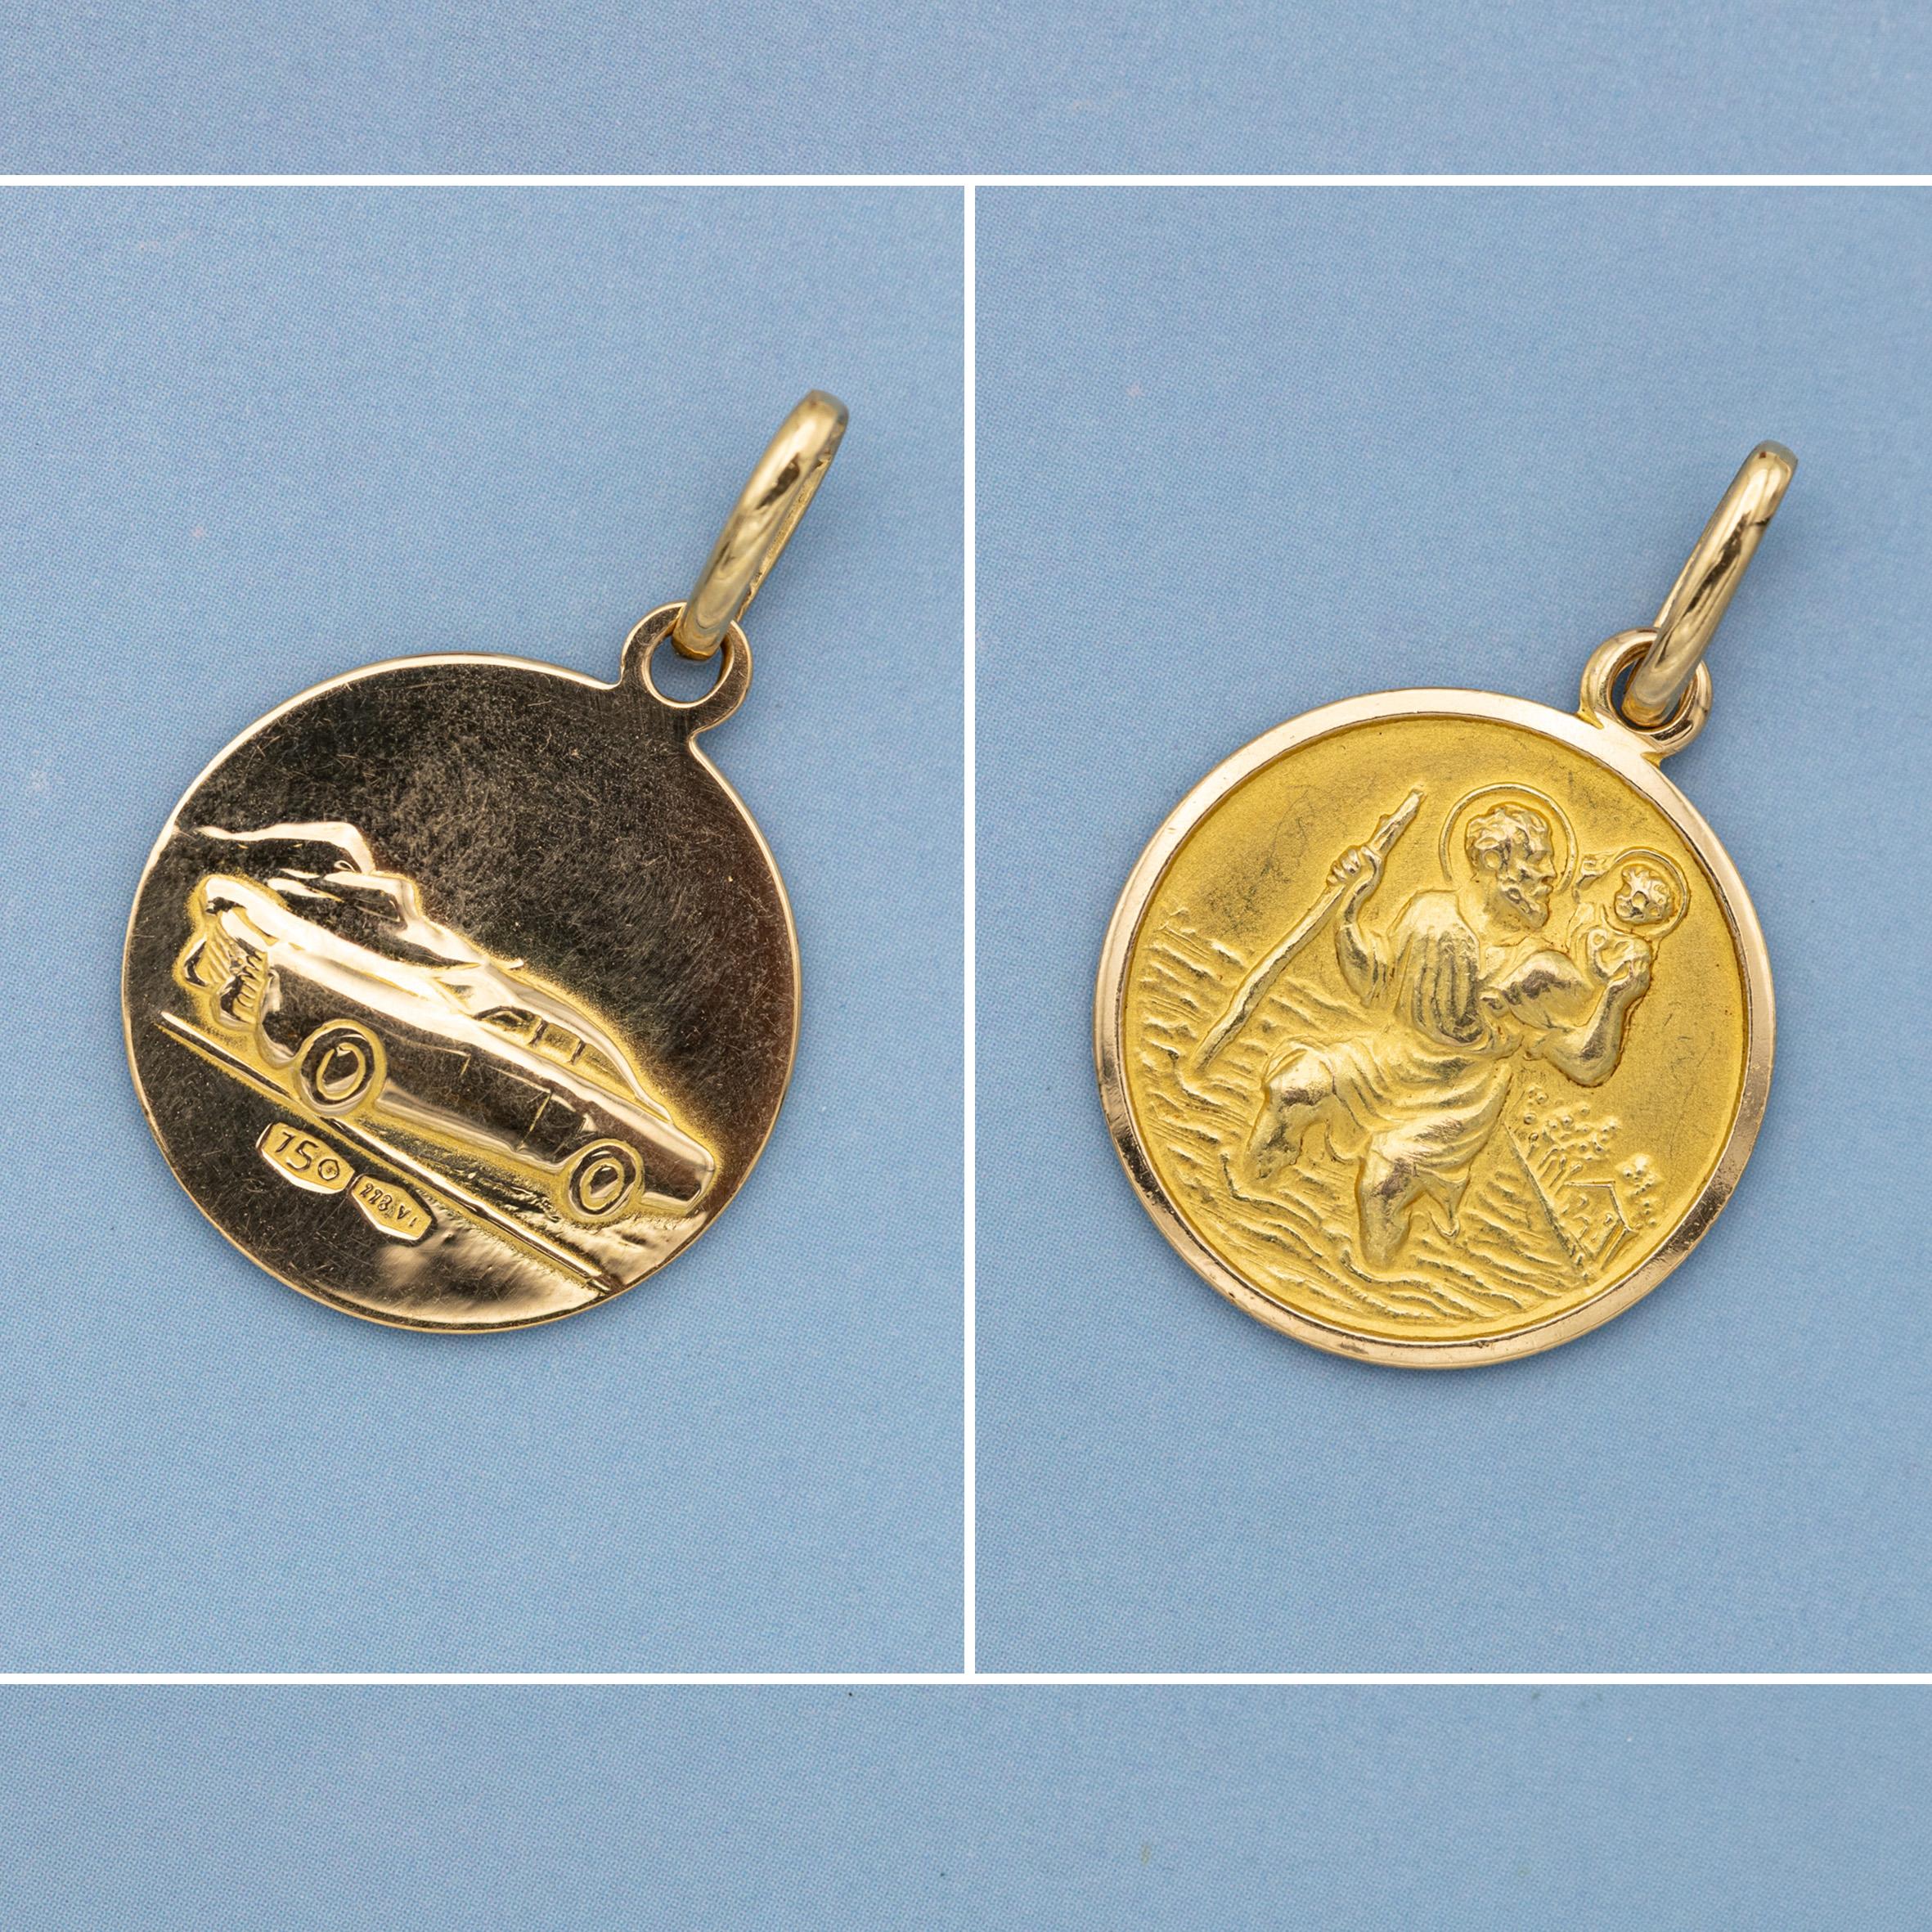 For sale is this lovely St. Christopher charm pendant crafted in 18ct yellow gold. Saint Christopher is the patron saint of all travellers. Christopher means 'Christ bearer' in Greek, or freely translated the one who carries Christ. This wonderful